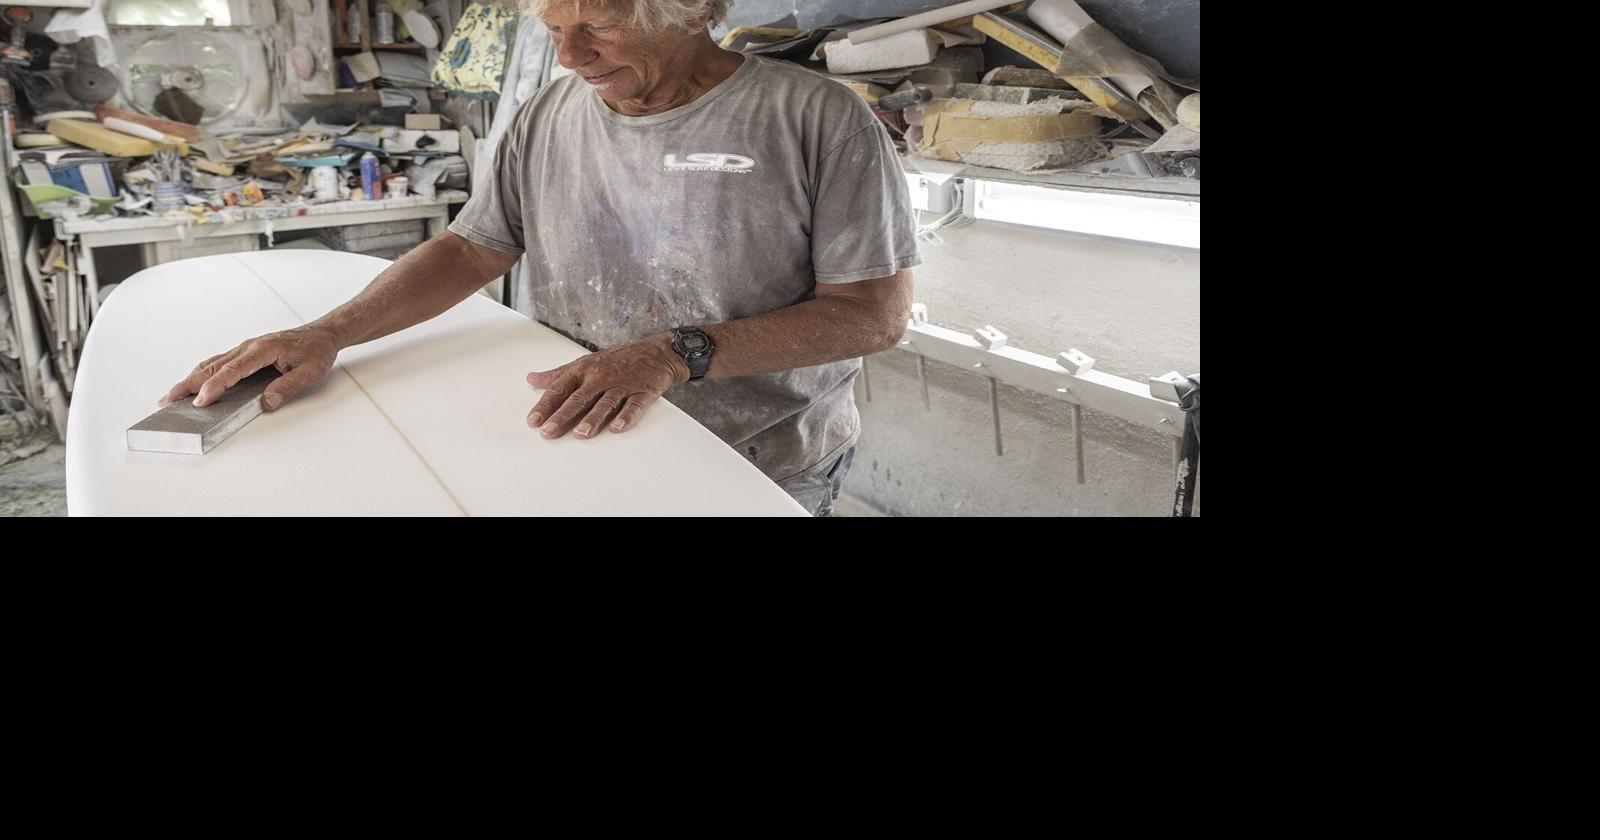 For Narragansett's Dave Levy, custom surfboard project a lesson in grieving, News